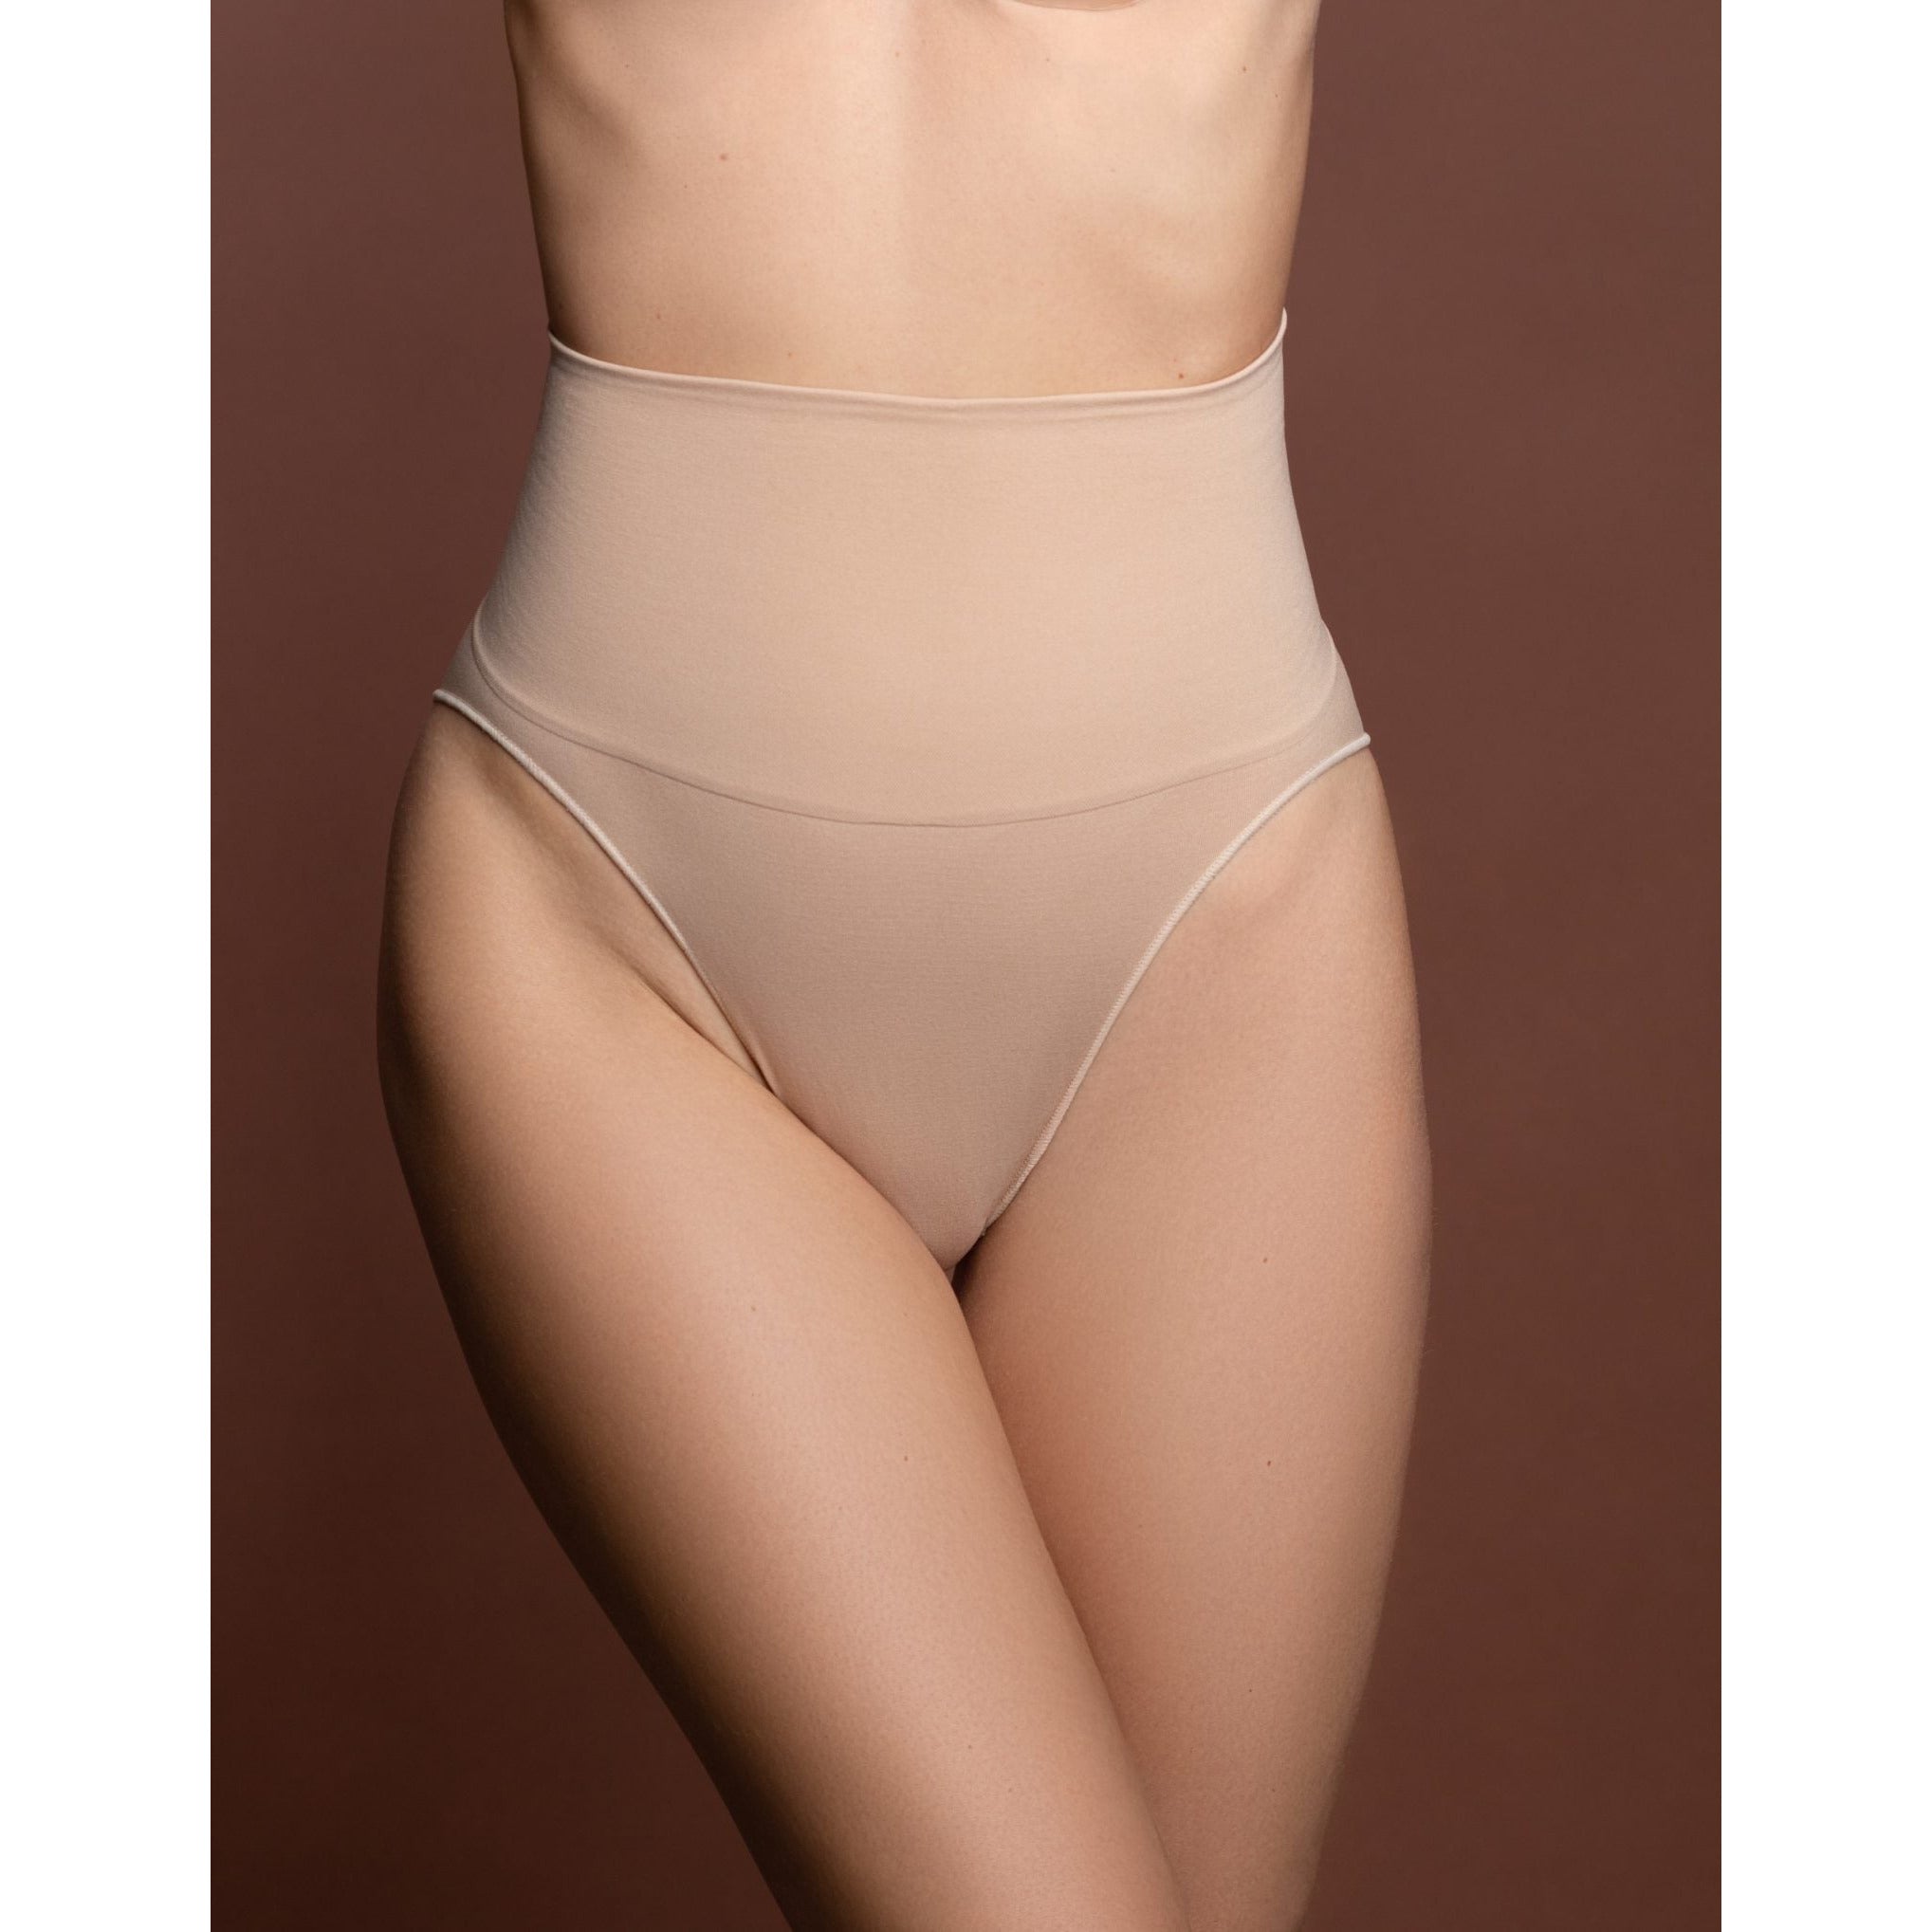 Atir Just For Jeans Shapewear – The Lady's Slip